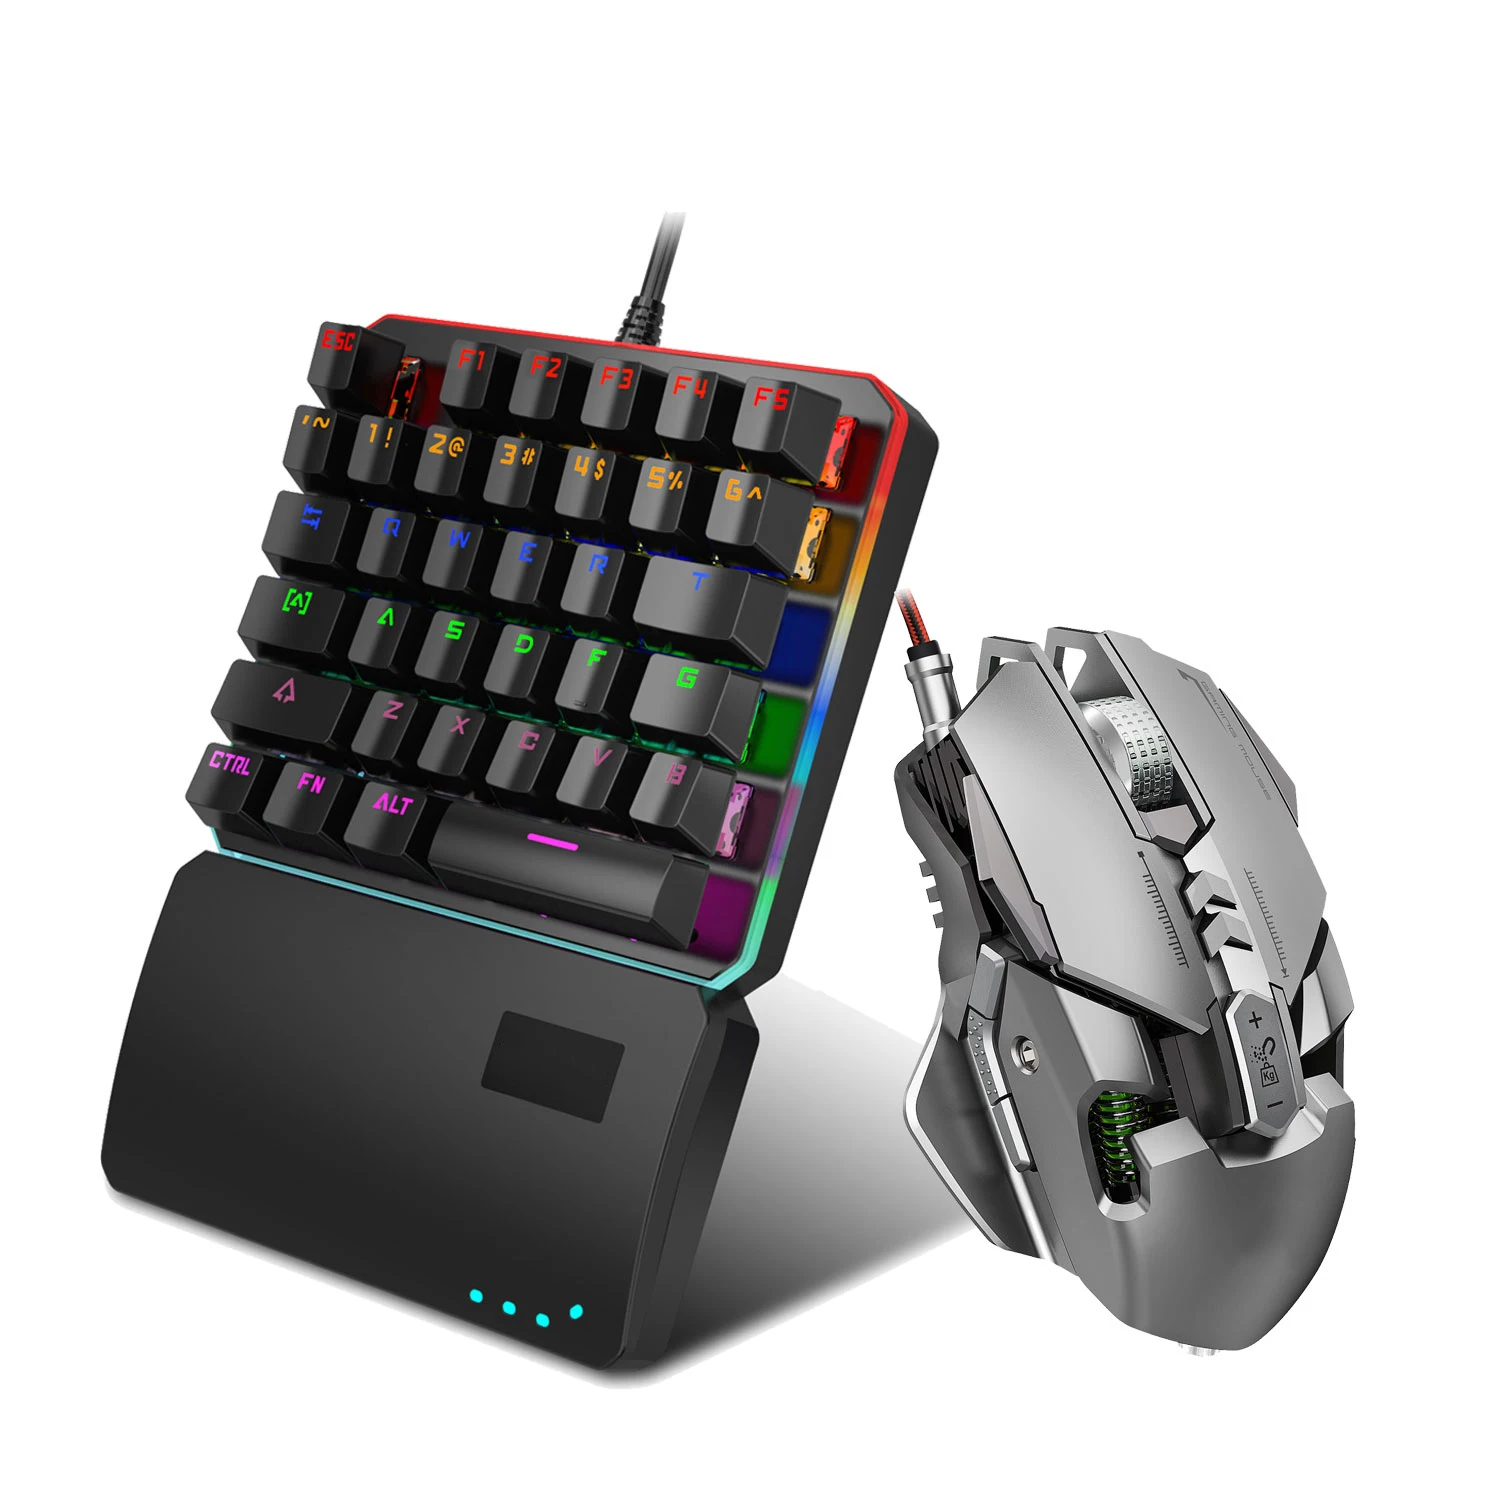 

Mini mechanical keyboard and Mouse Combo wired keyboard and mouse USB RGB backlight gaming keyboard mouse combos